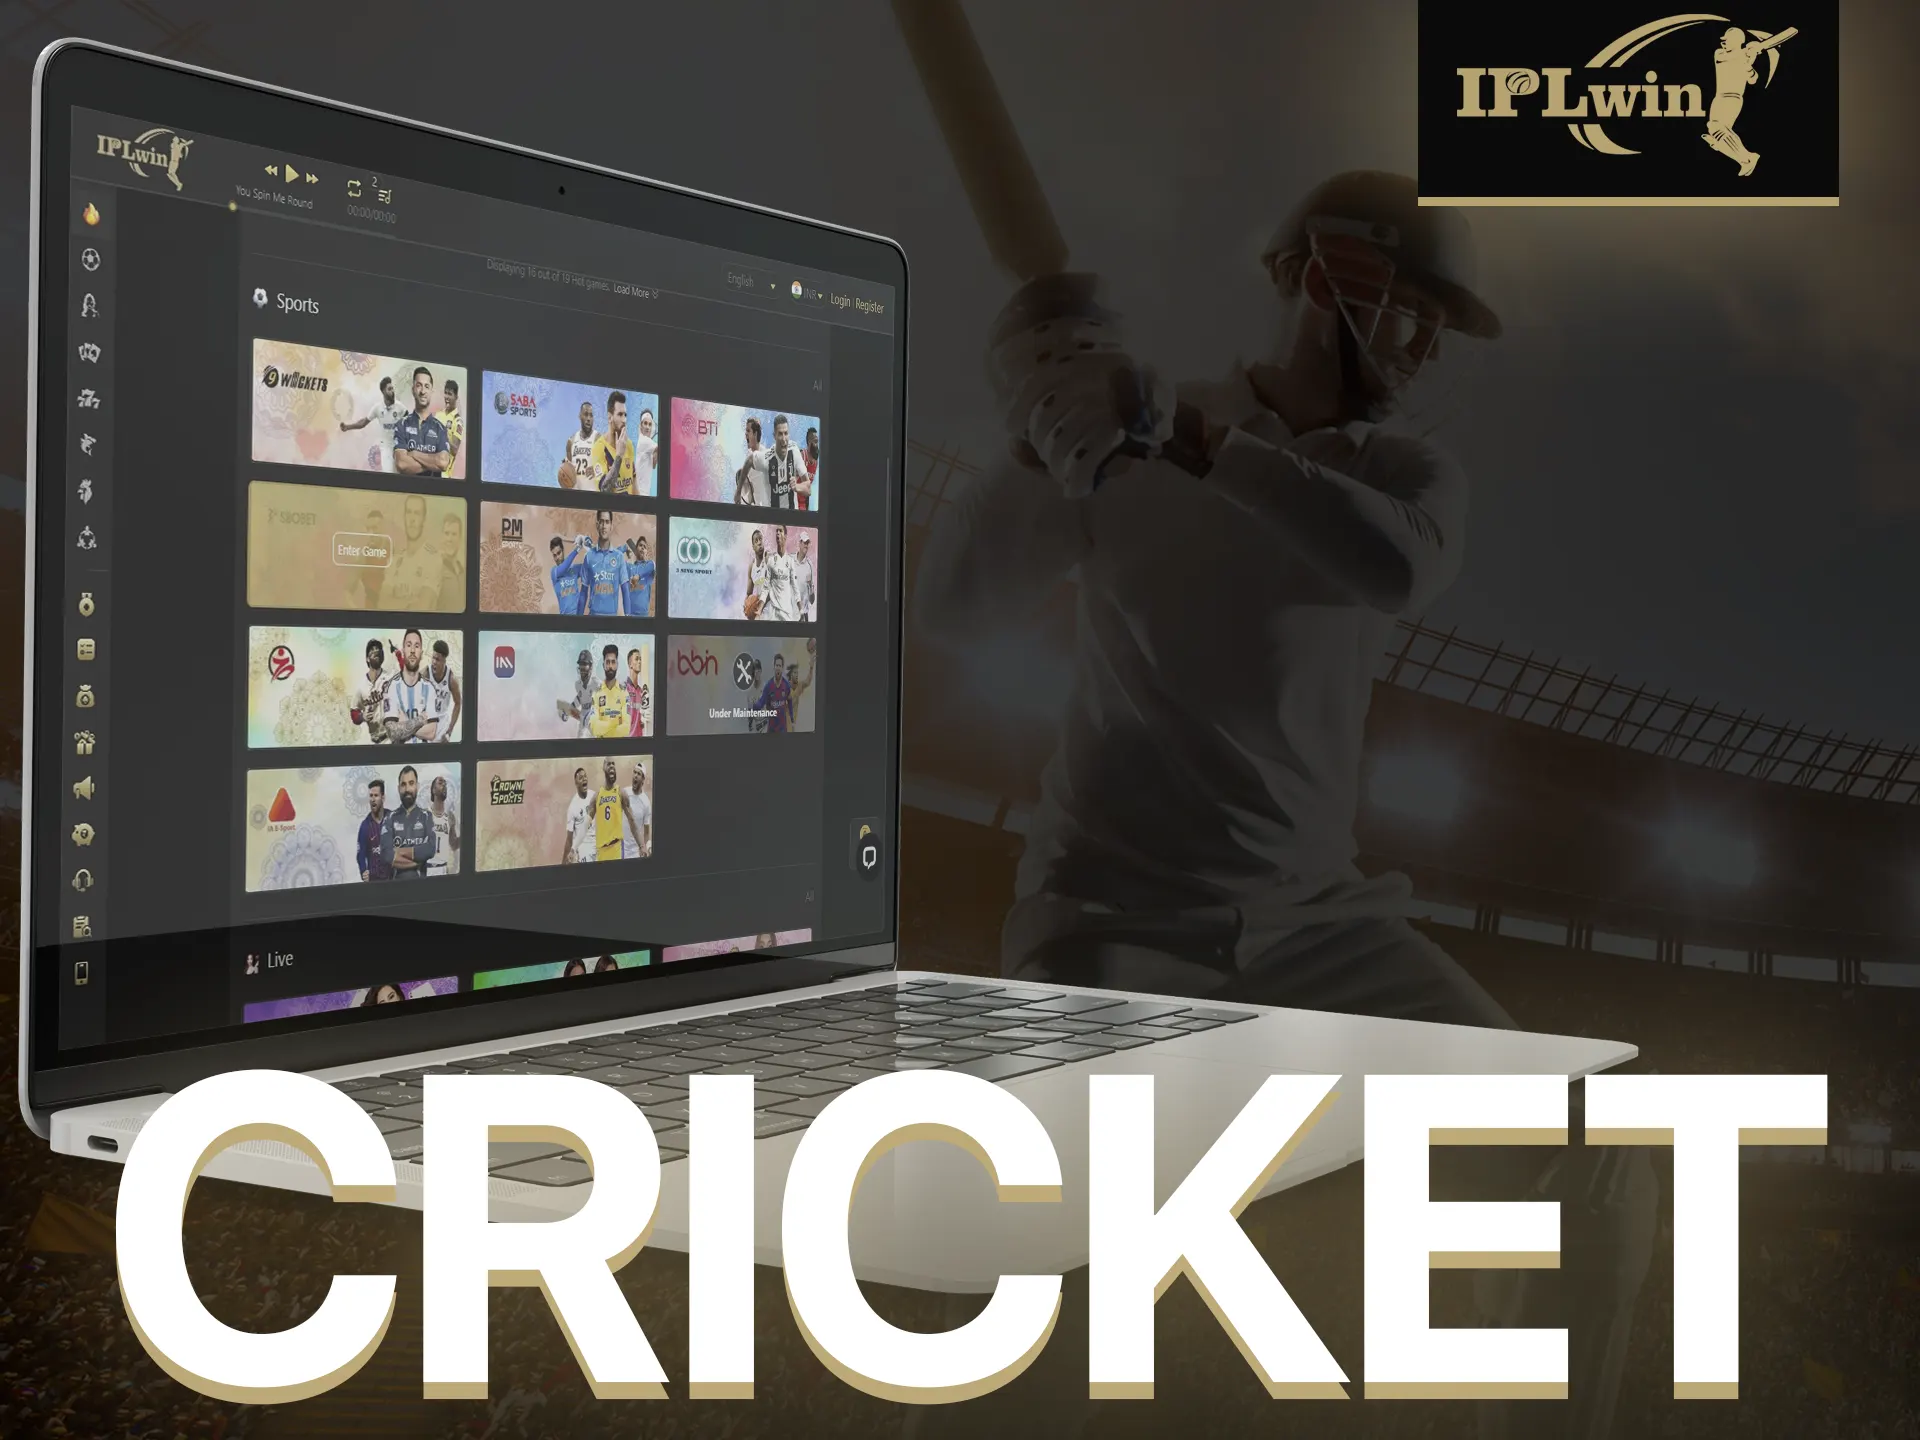 Bet on cricket with IPLWIN.